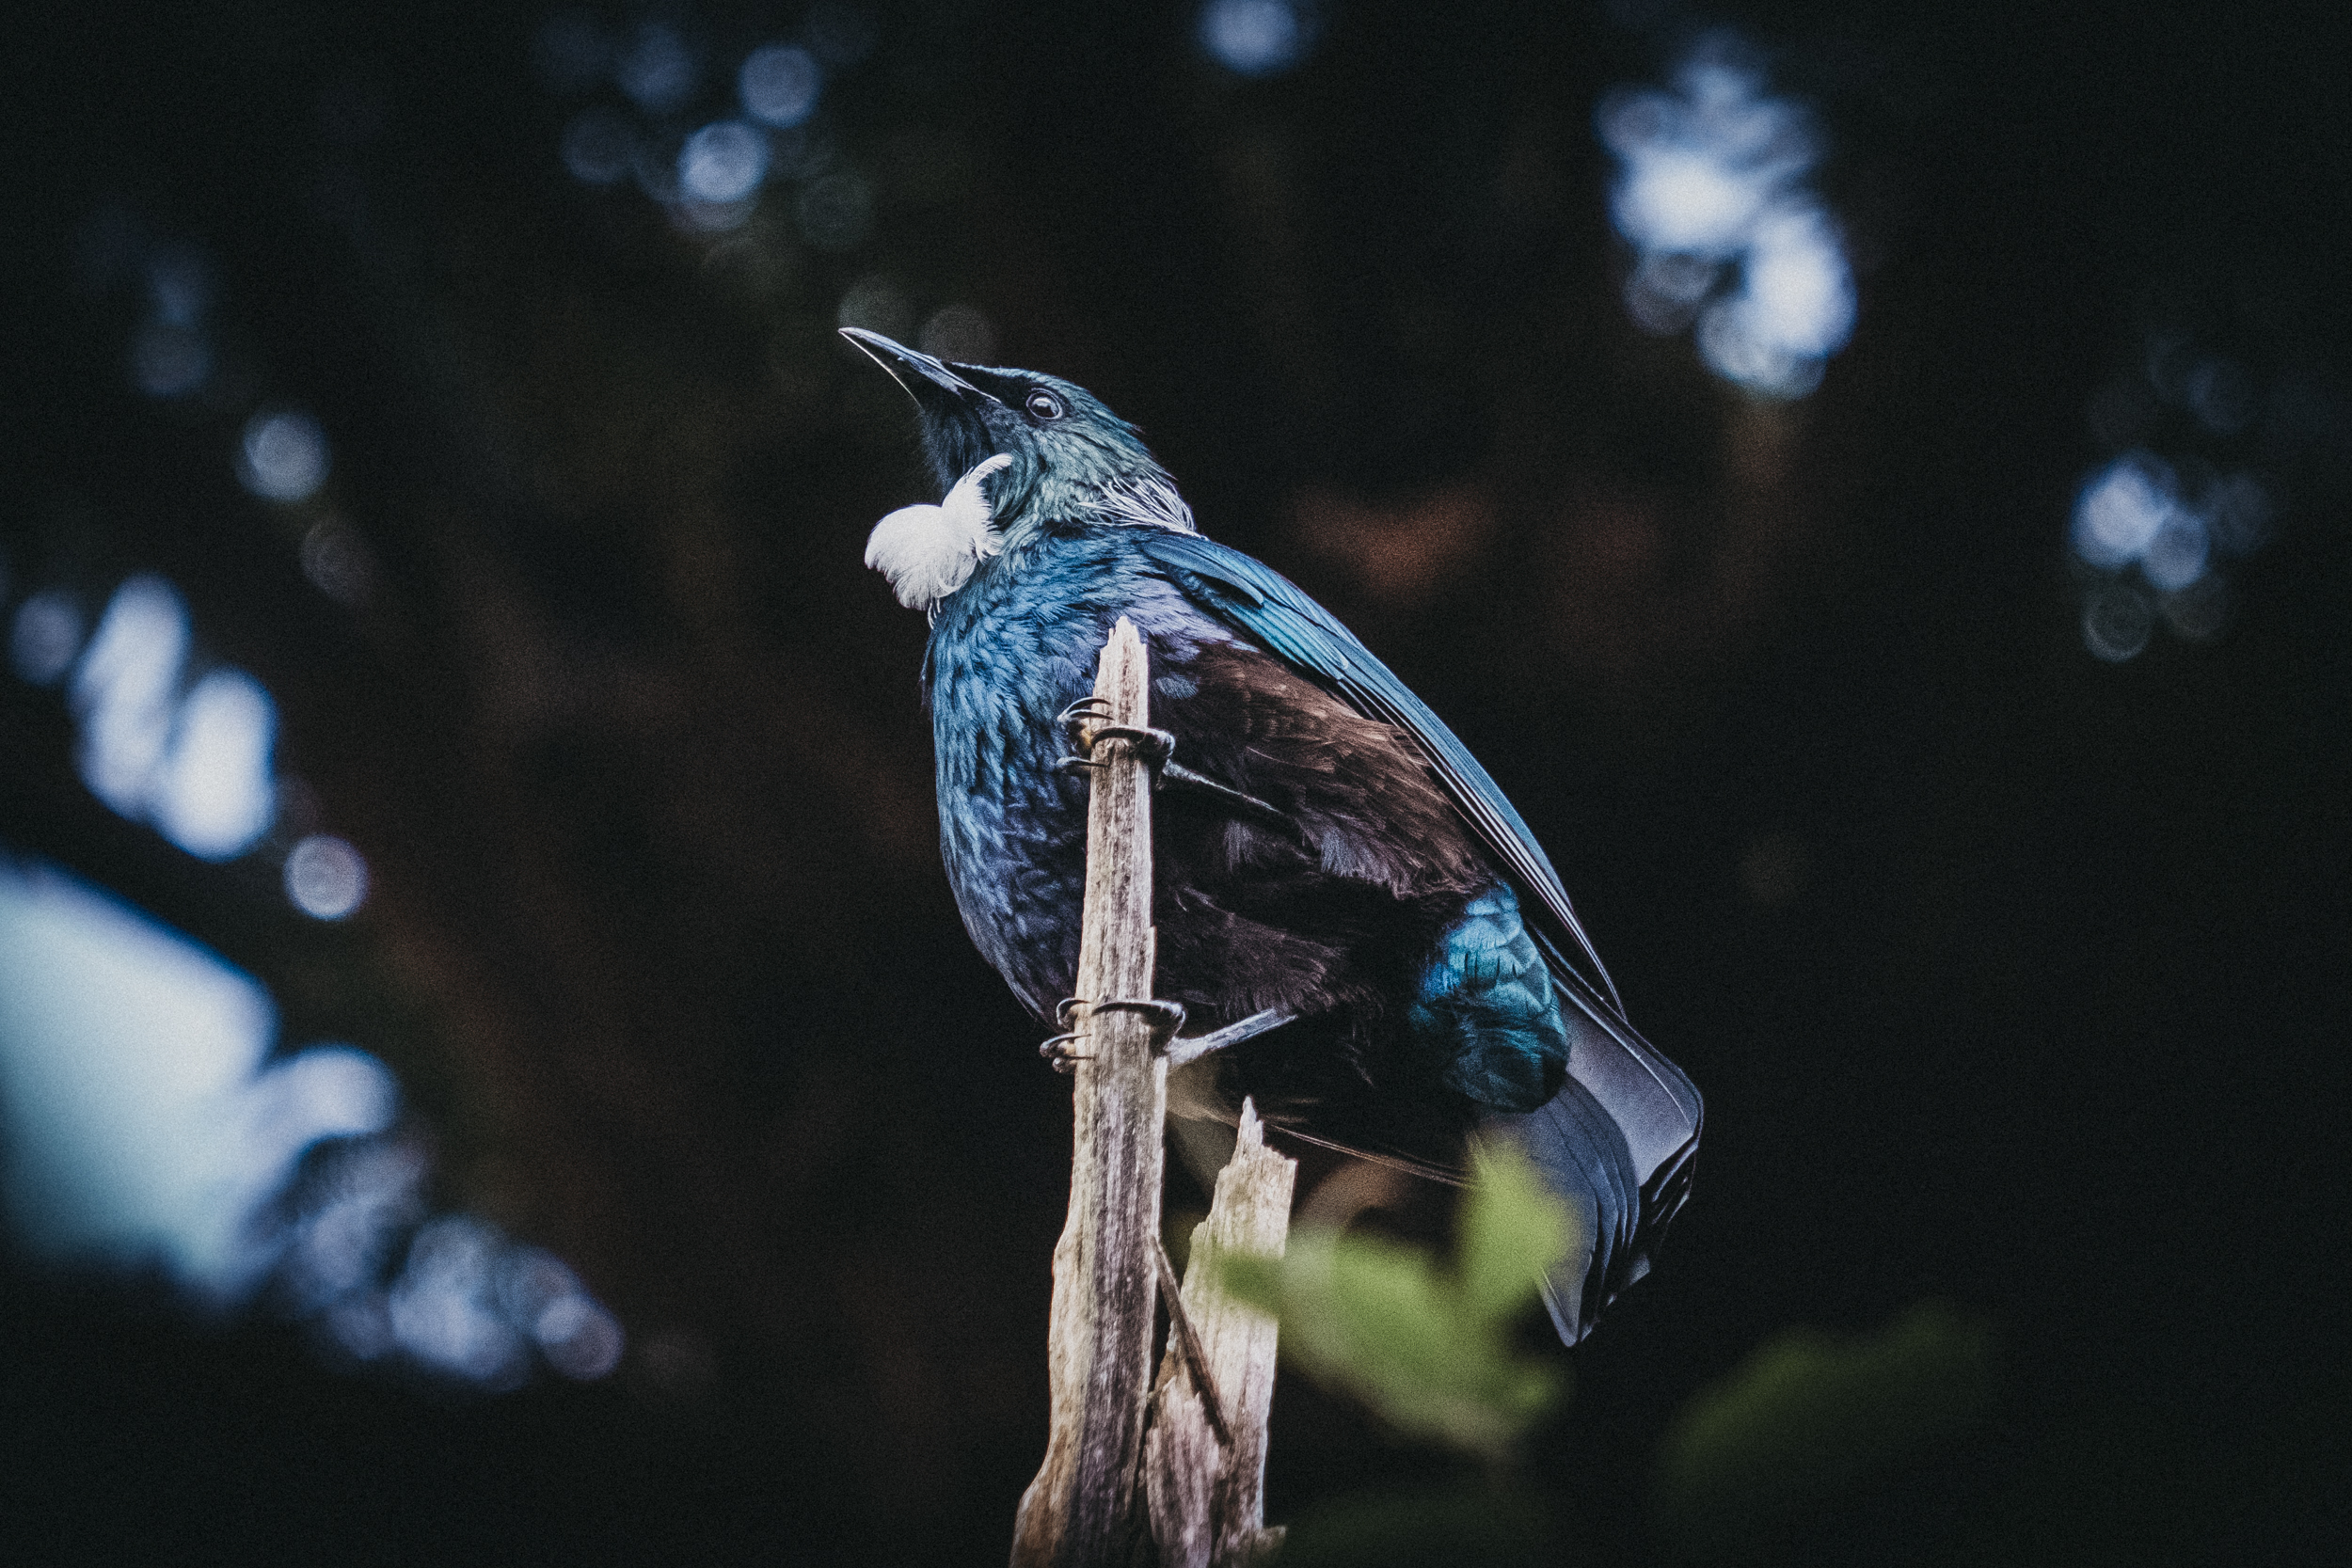 Day Six: Nick succeeds in his mission to photograph the Tui bird, photo @nickforge.